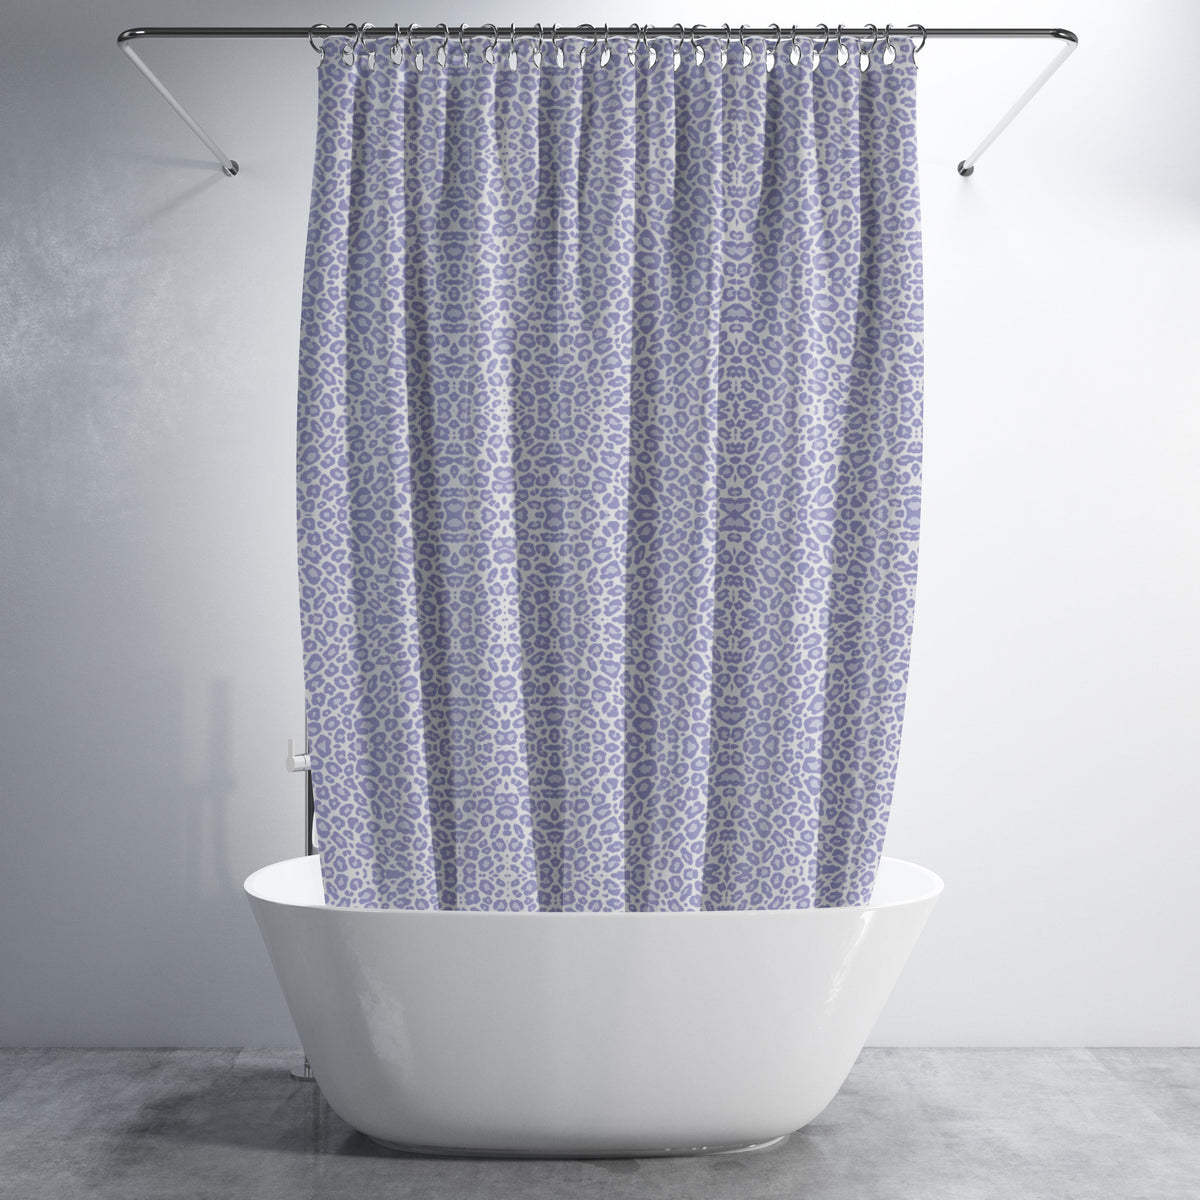 Copy of The Shower Panel - Tanzania Lavender MWW 